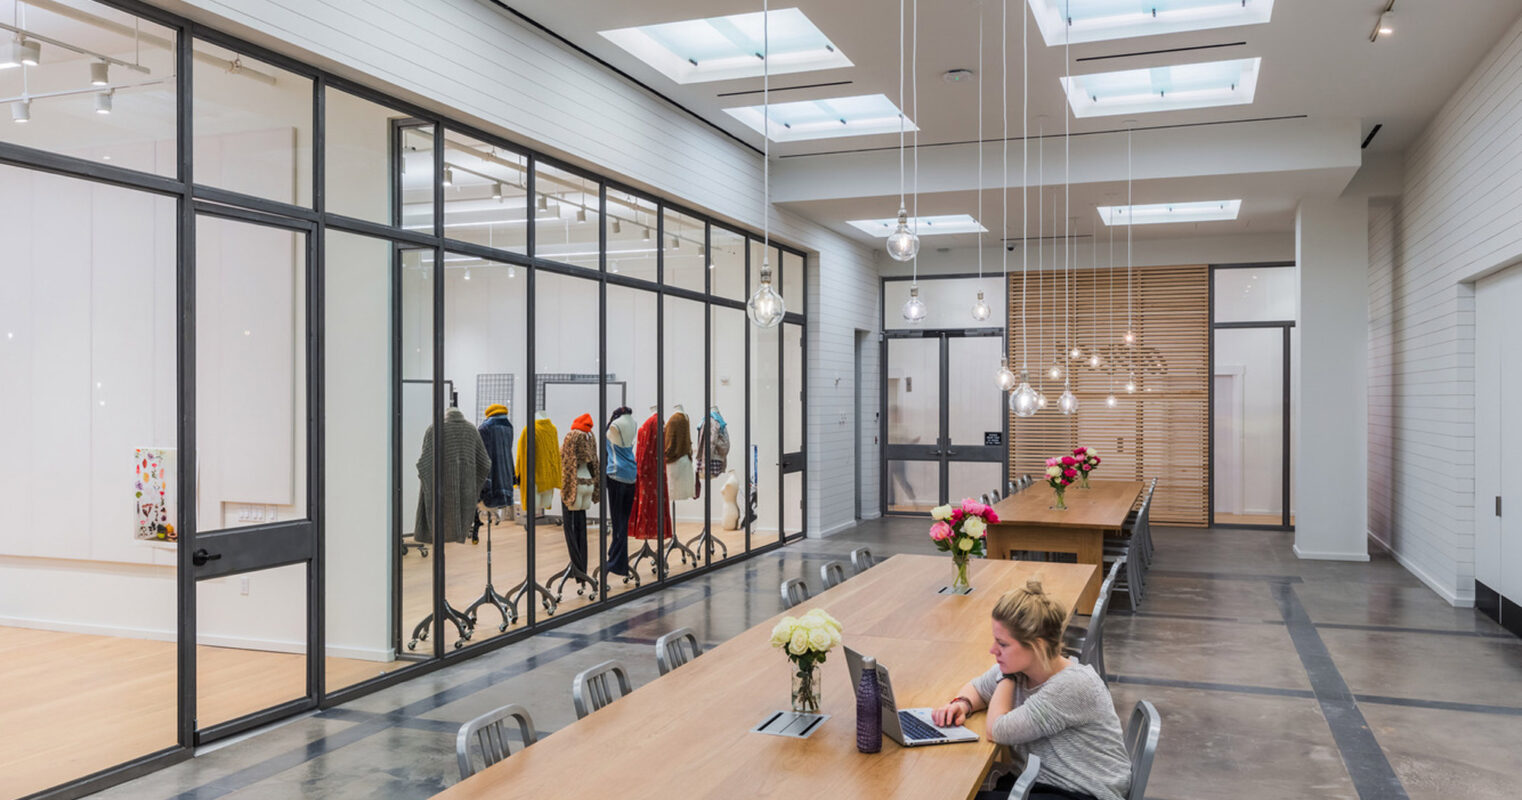 Modern open-plan retail space with skylights, featuring a central communal table, sleek black-framed glass partitions, and clothing racks against an exposed brick accent wall. Vibrant floral arrangements add color to the neutral palette.